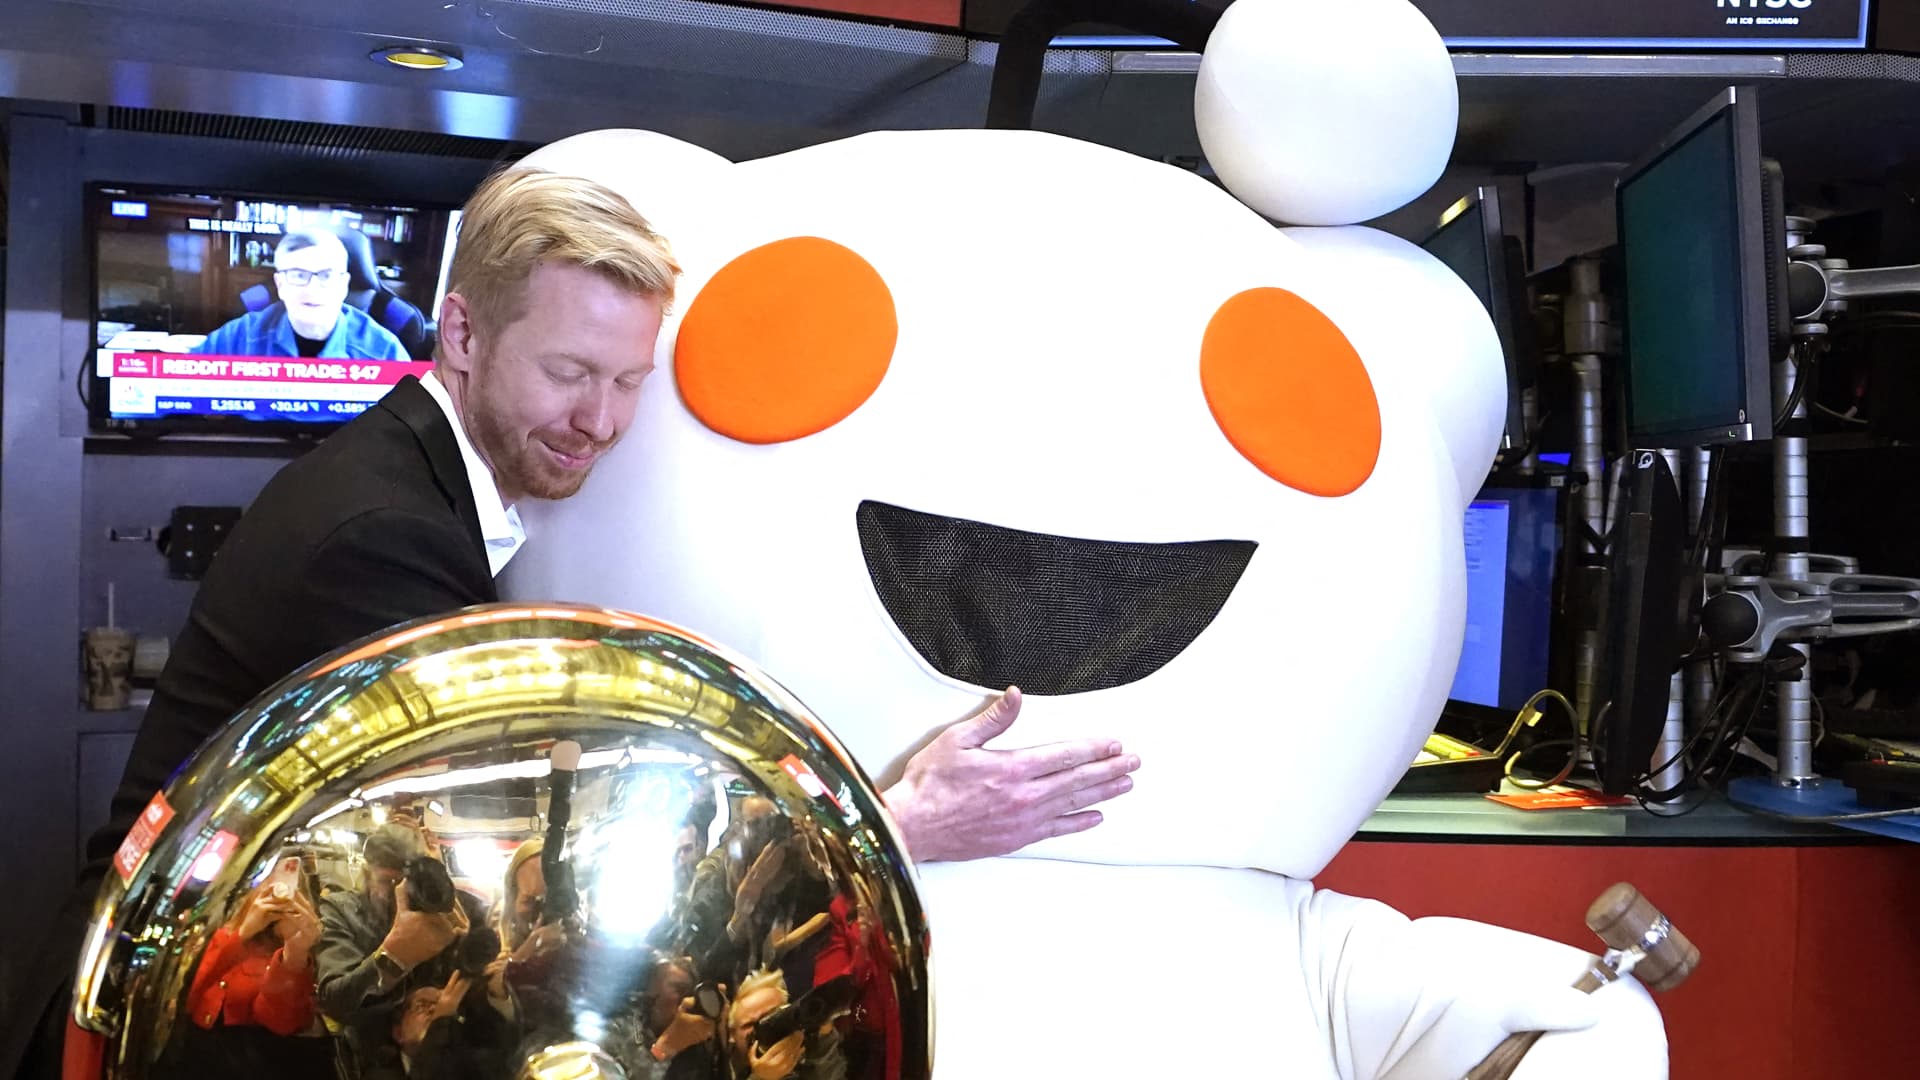 Reddit shares soar 11% after company reports revenue pop in debut earnings report